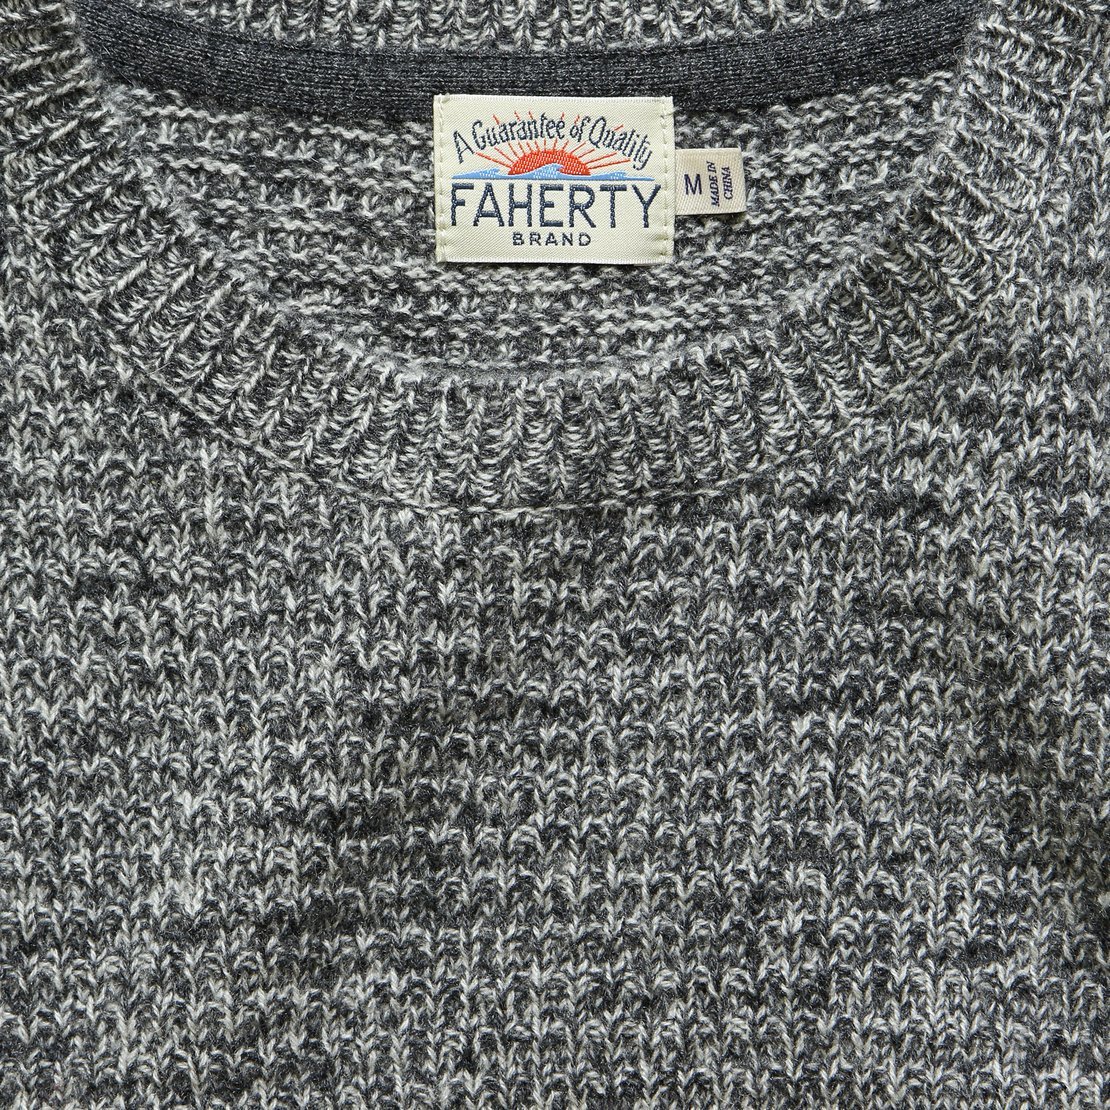 Cashmere Crewneck - Charcoal Marl - Faherty - STAG Provisions - Tops - Sweater